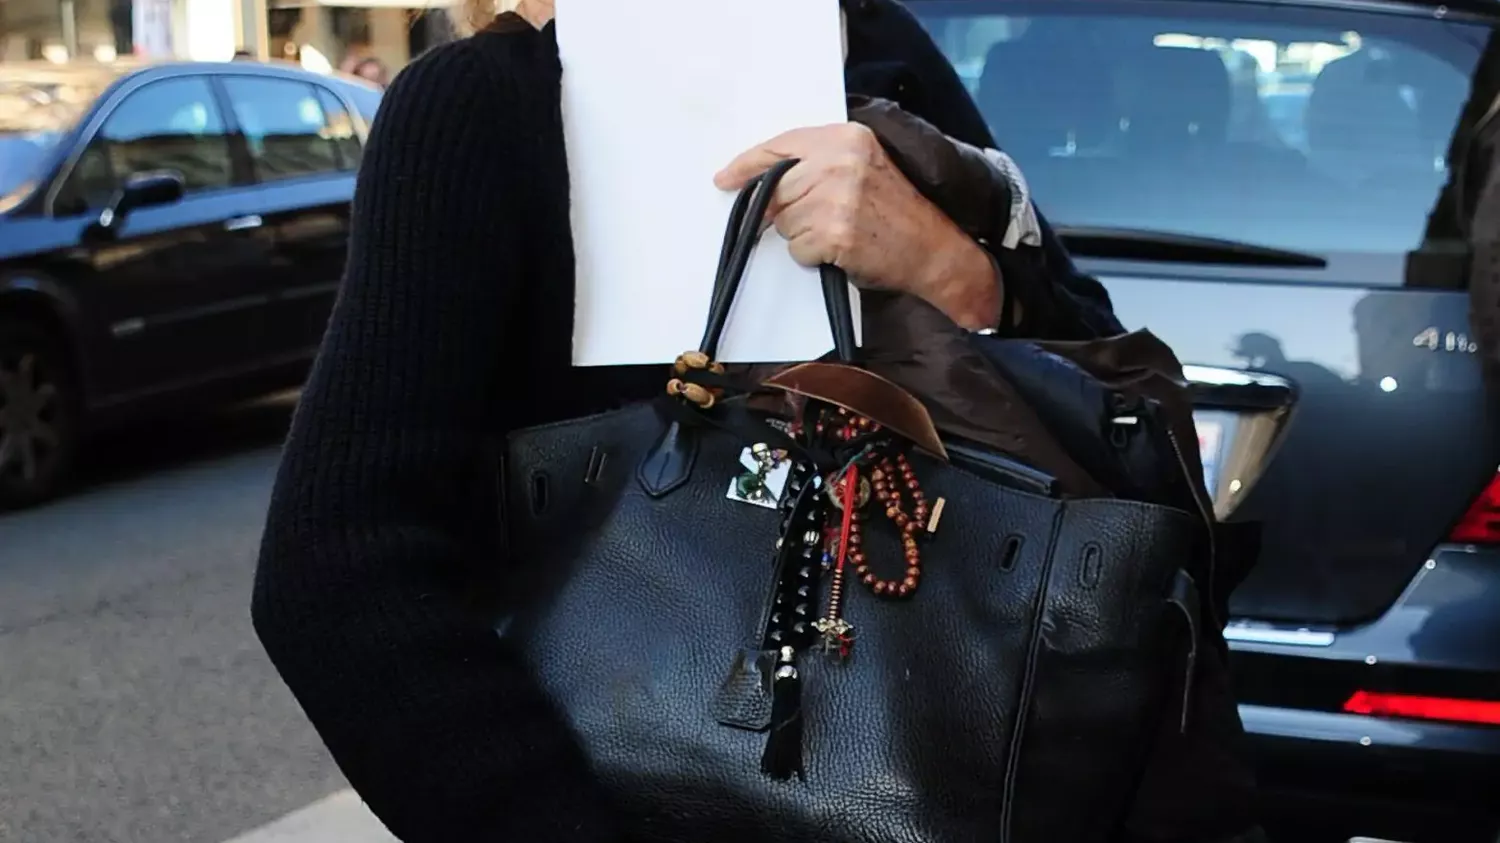 Did you know the classic Hermes Birkin was designed on a sick bag